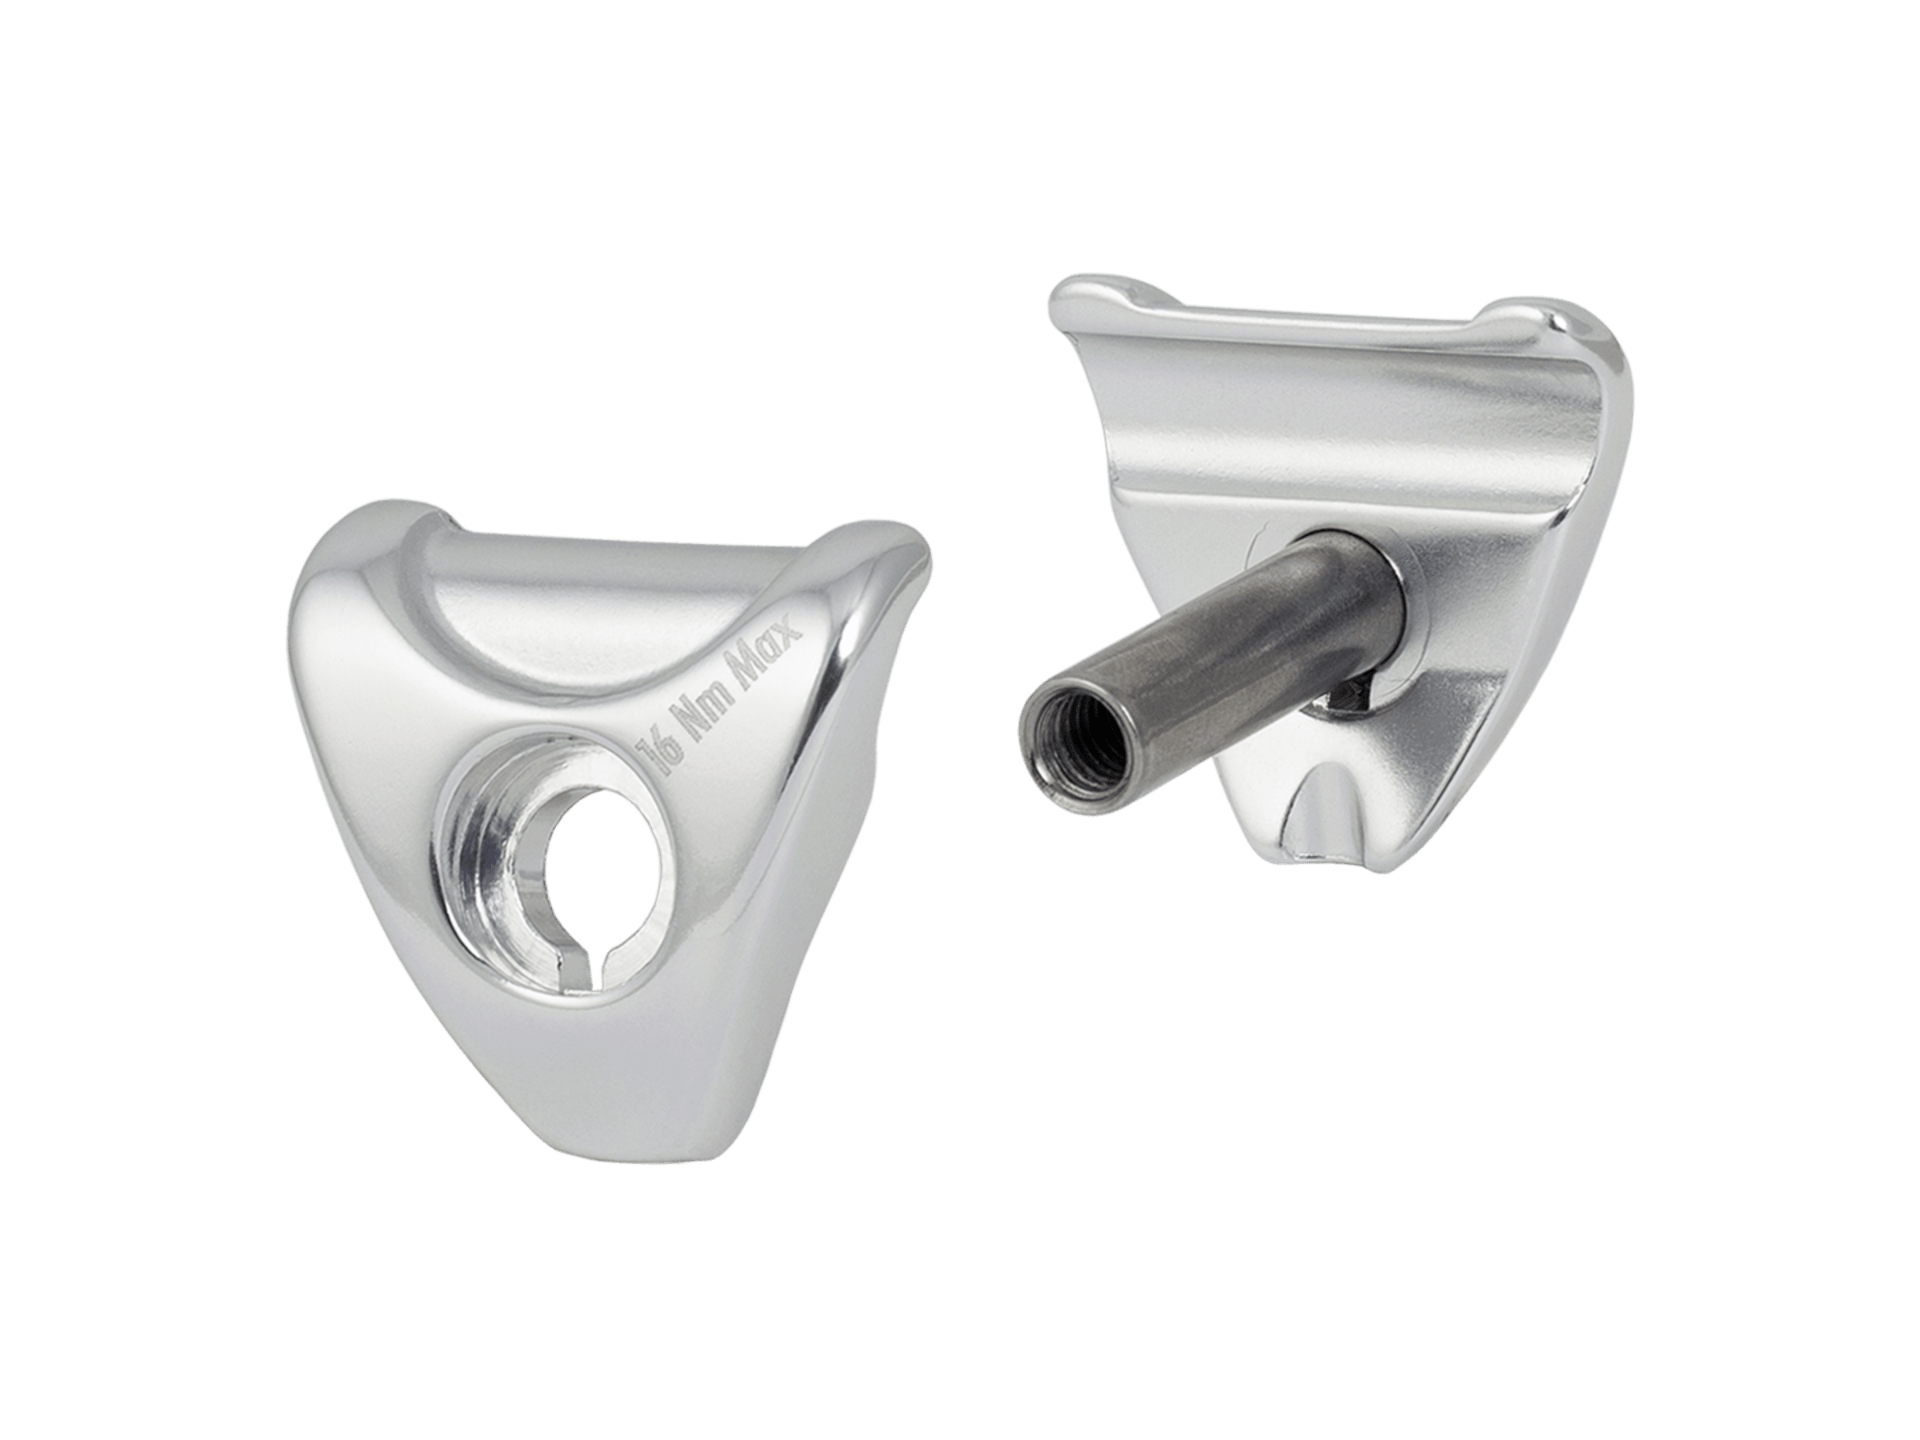 Bontrager Rotary Head Seatpost 7x9mm Saddle Clamp Ears